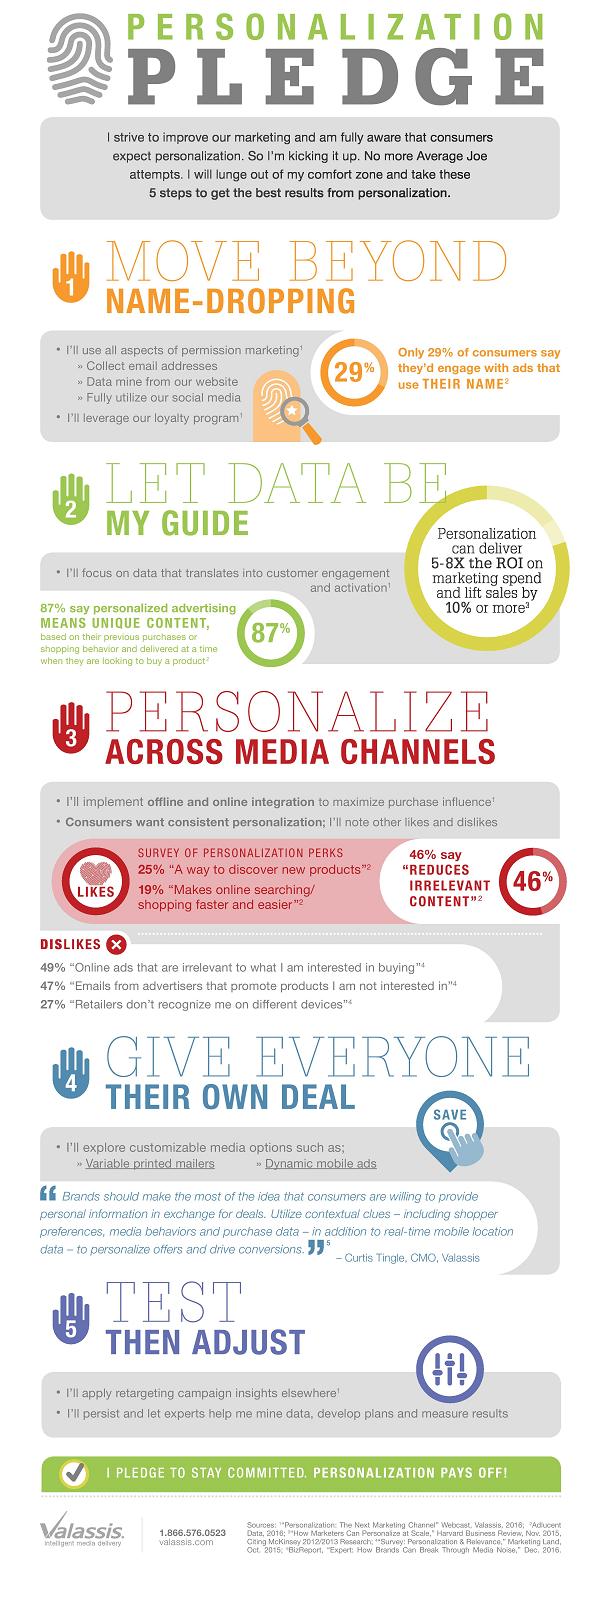 Personalization-Pledge-Infographic1-page-001 (1) (002)